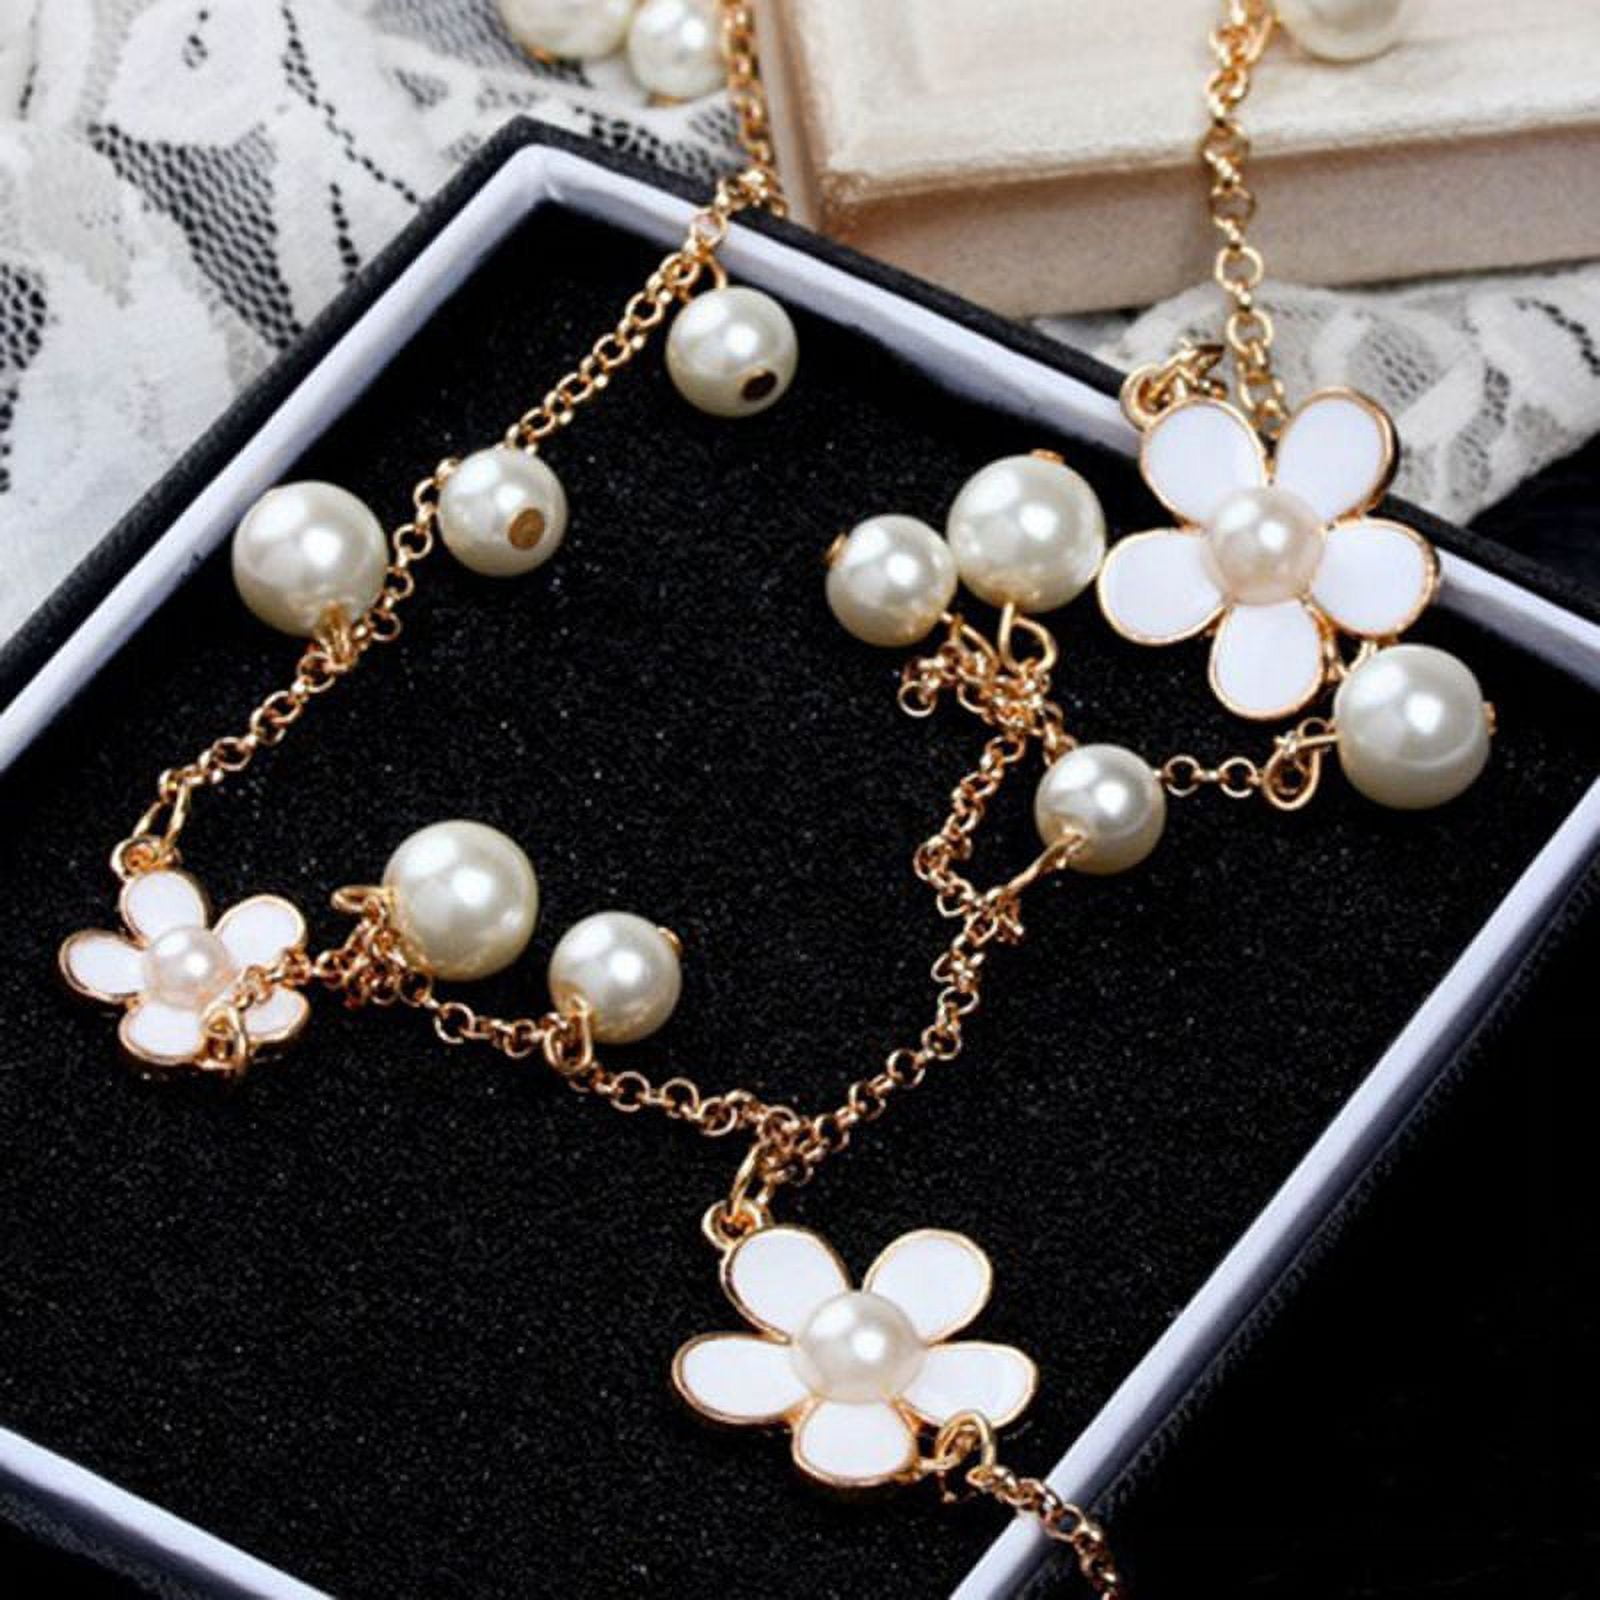 Chanel Style Long Two Layer Pearl Necklace